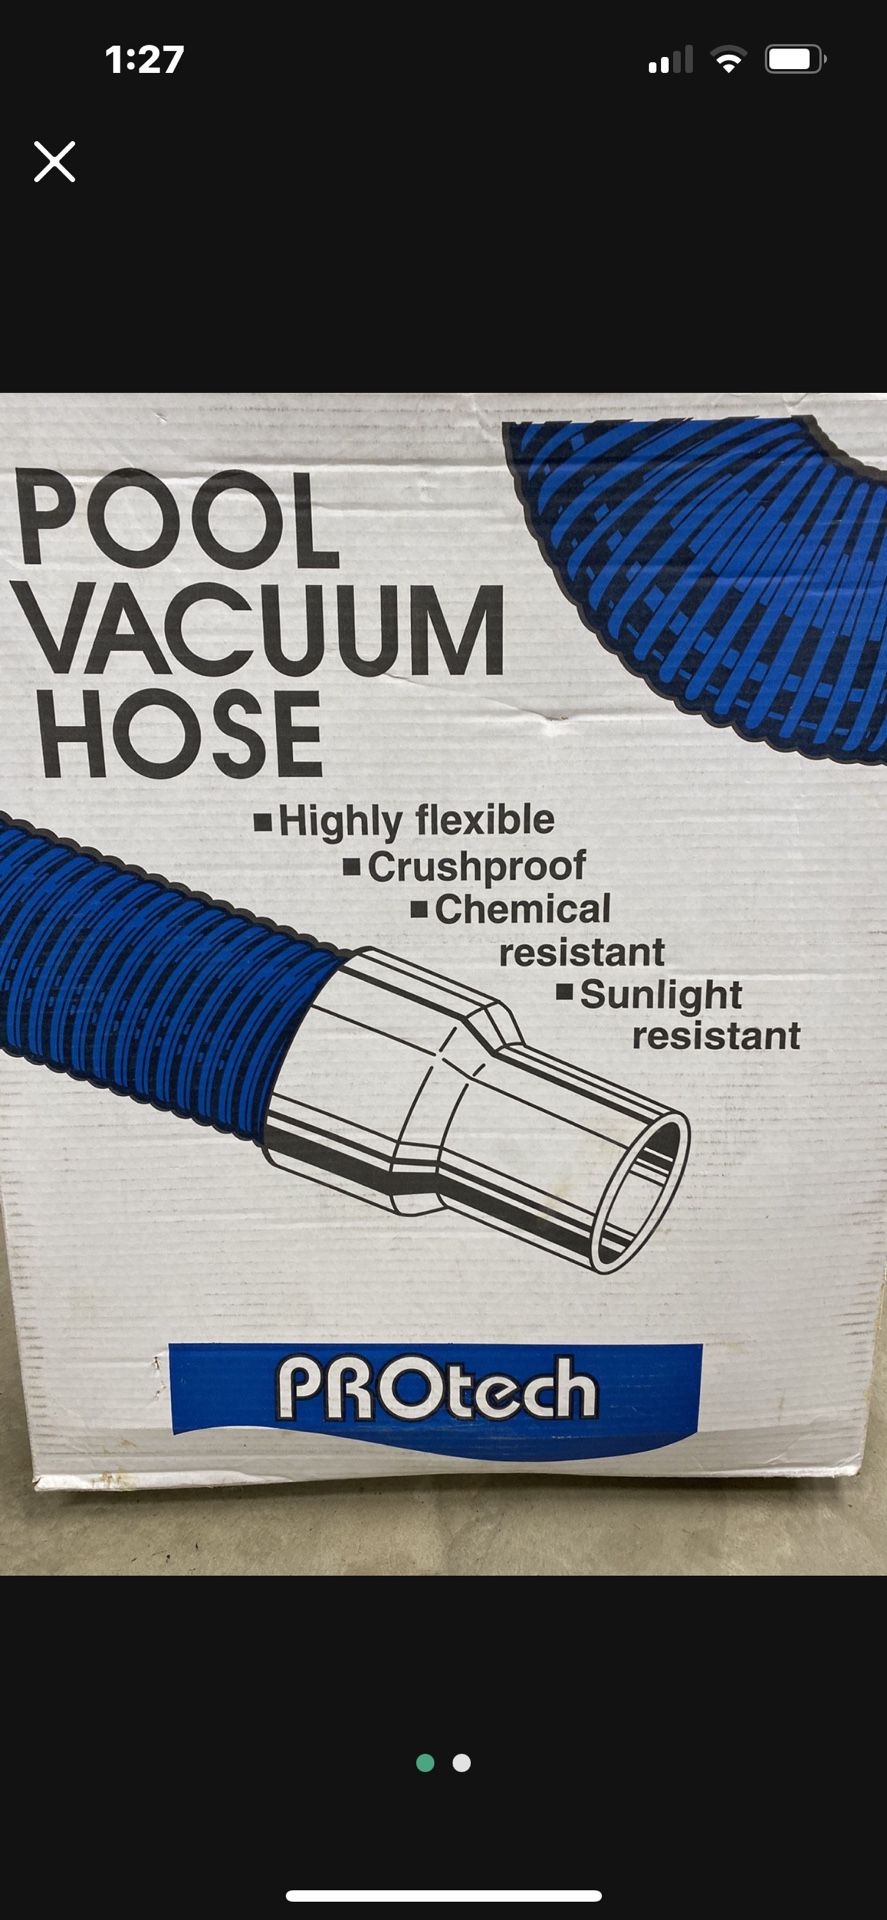 Swimming pool vacuum hose -Never Taken Out Of Box